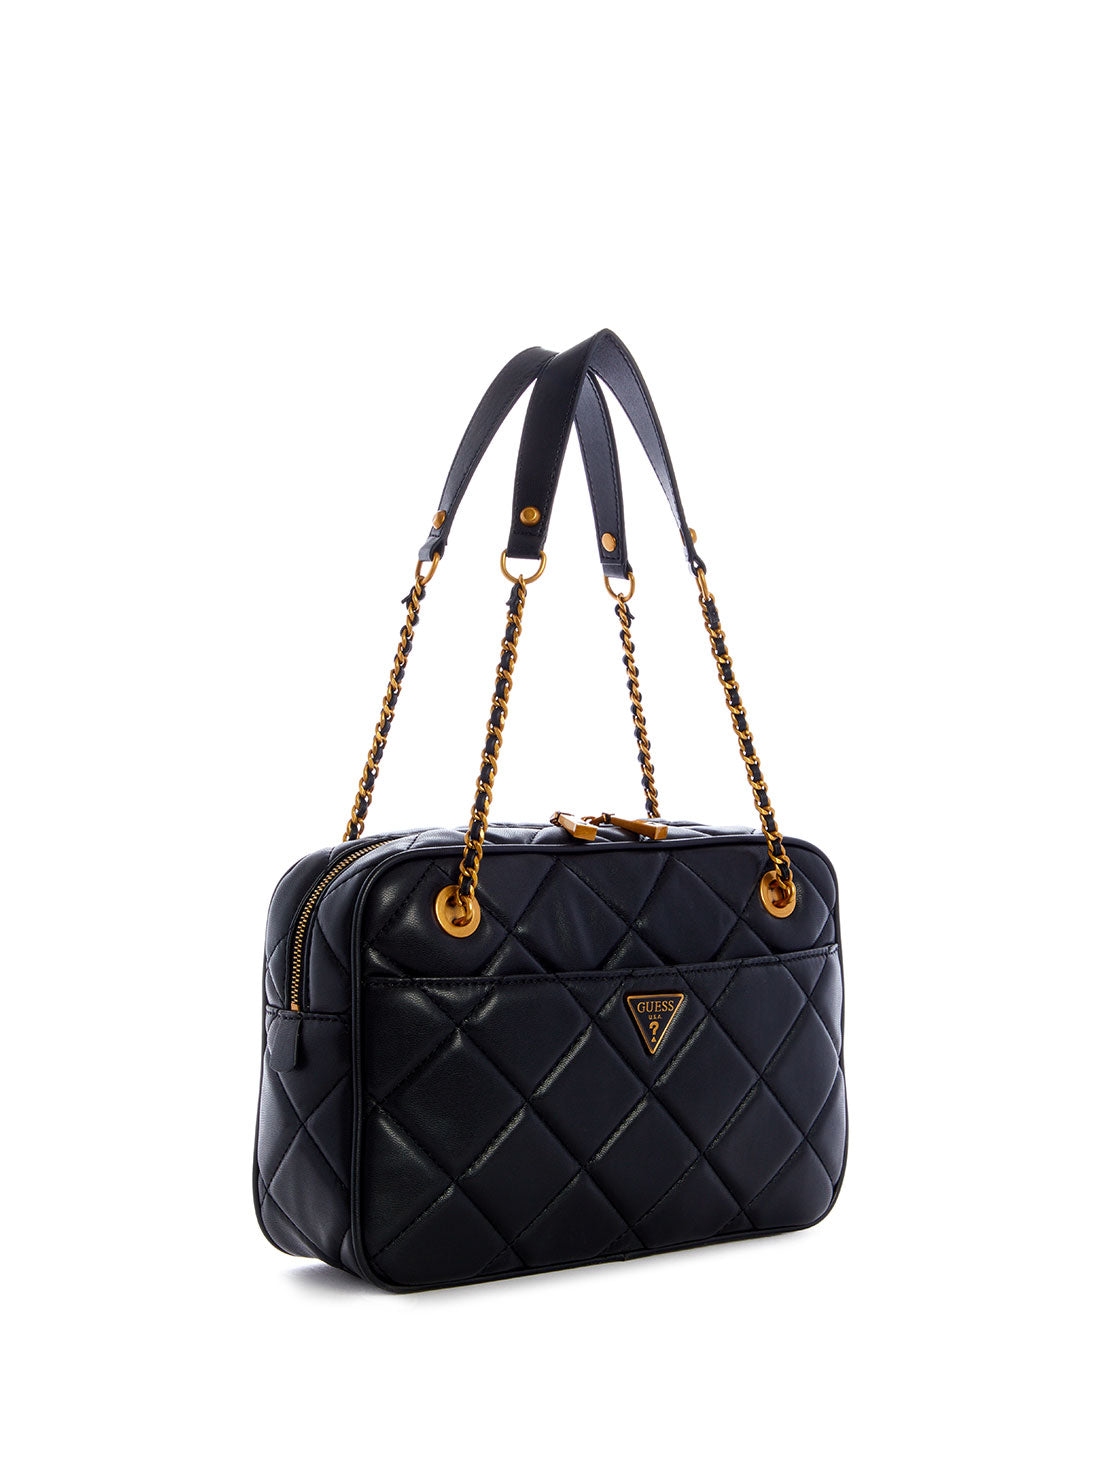 GUESS Womens Black Cessily Shoulder Bag QB767918 Front Side View